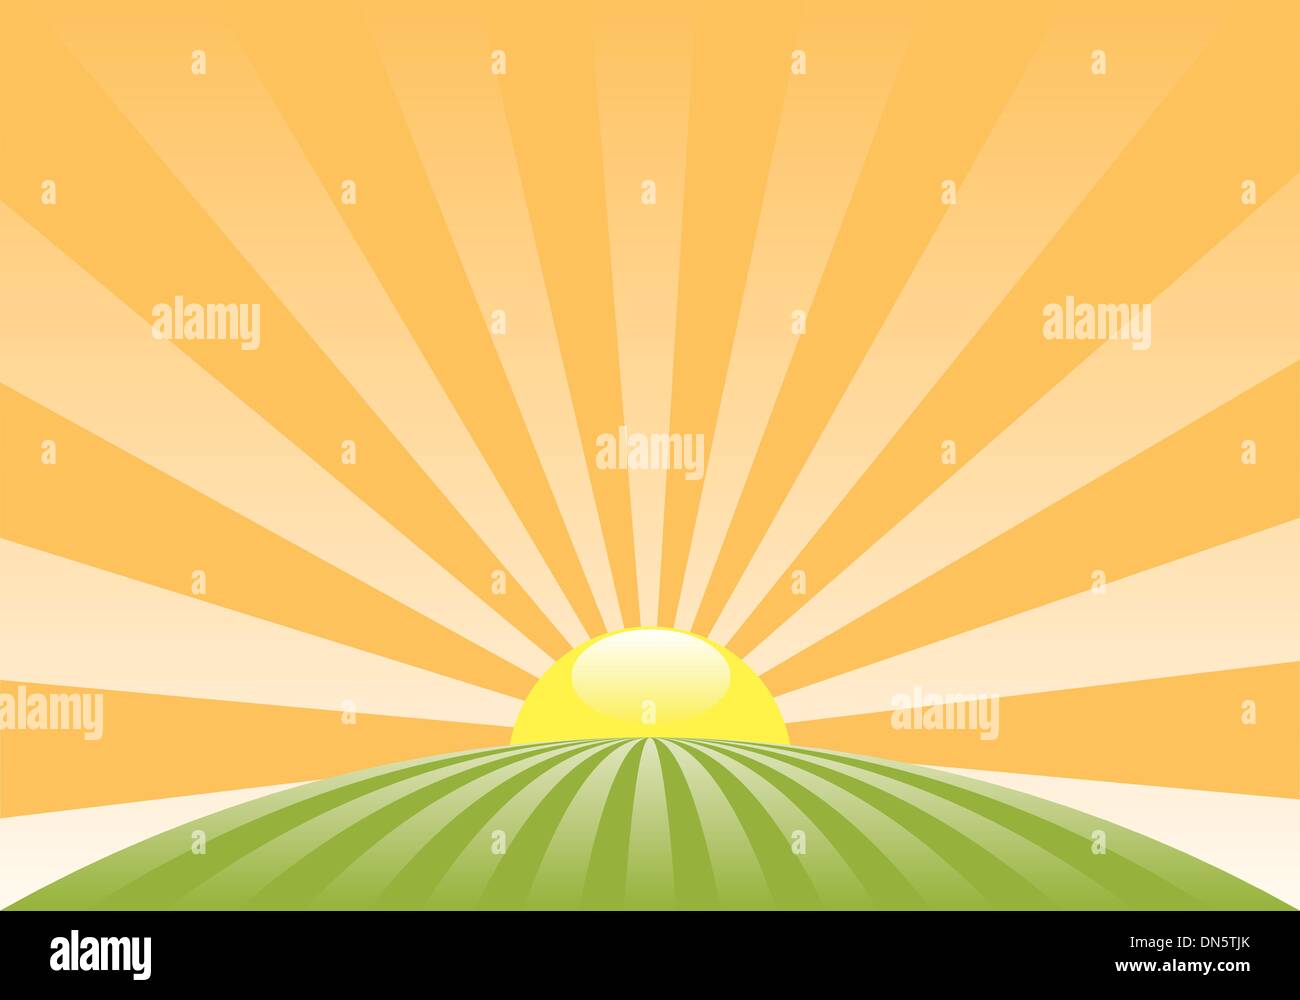 vector abstract rural landscape with rising sun Stock Vector